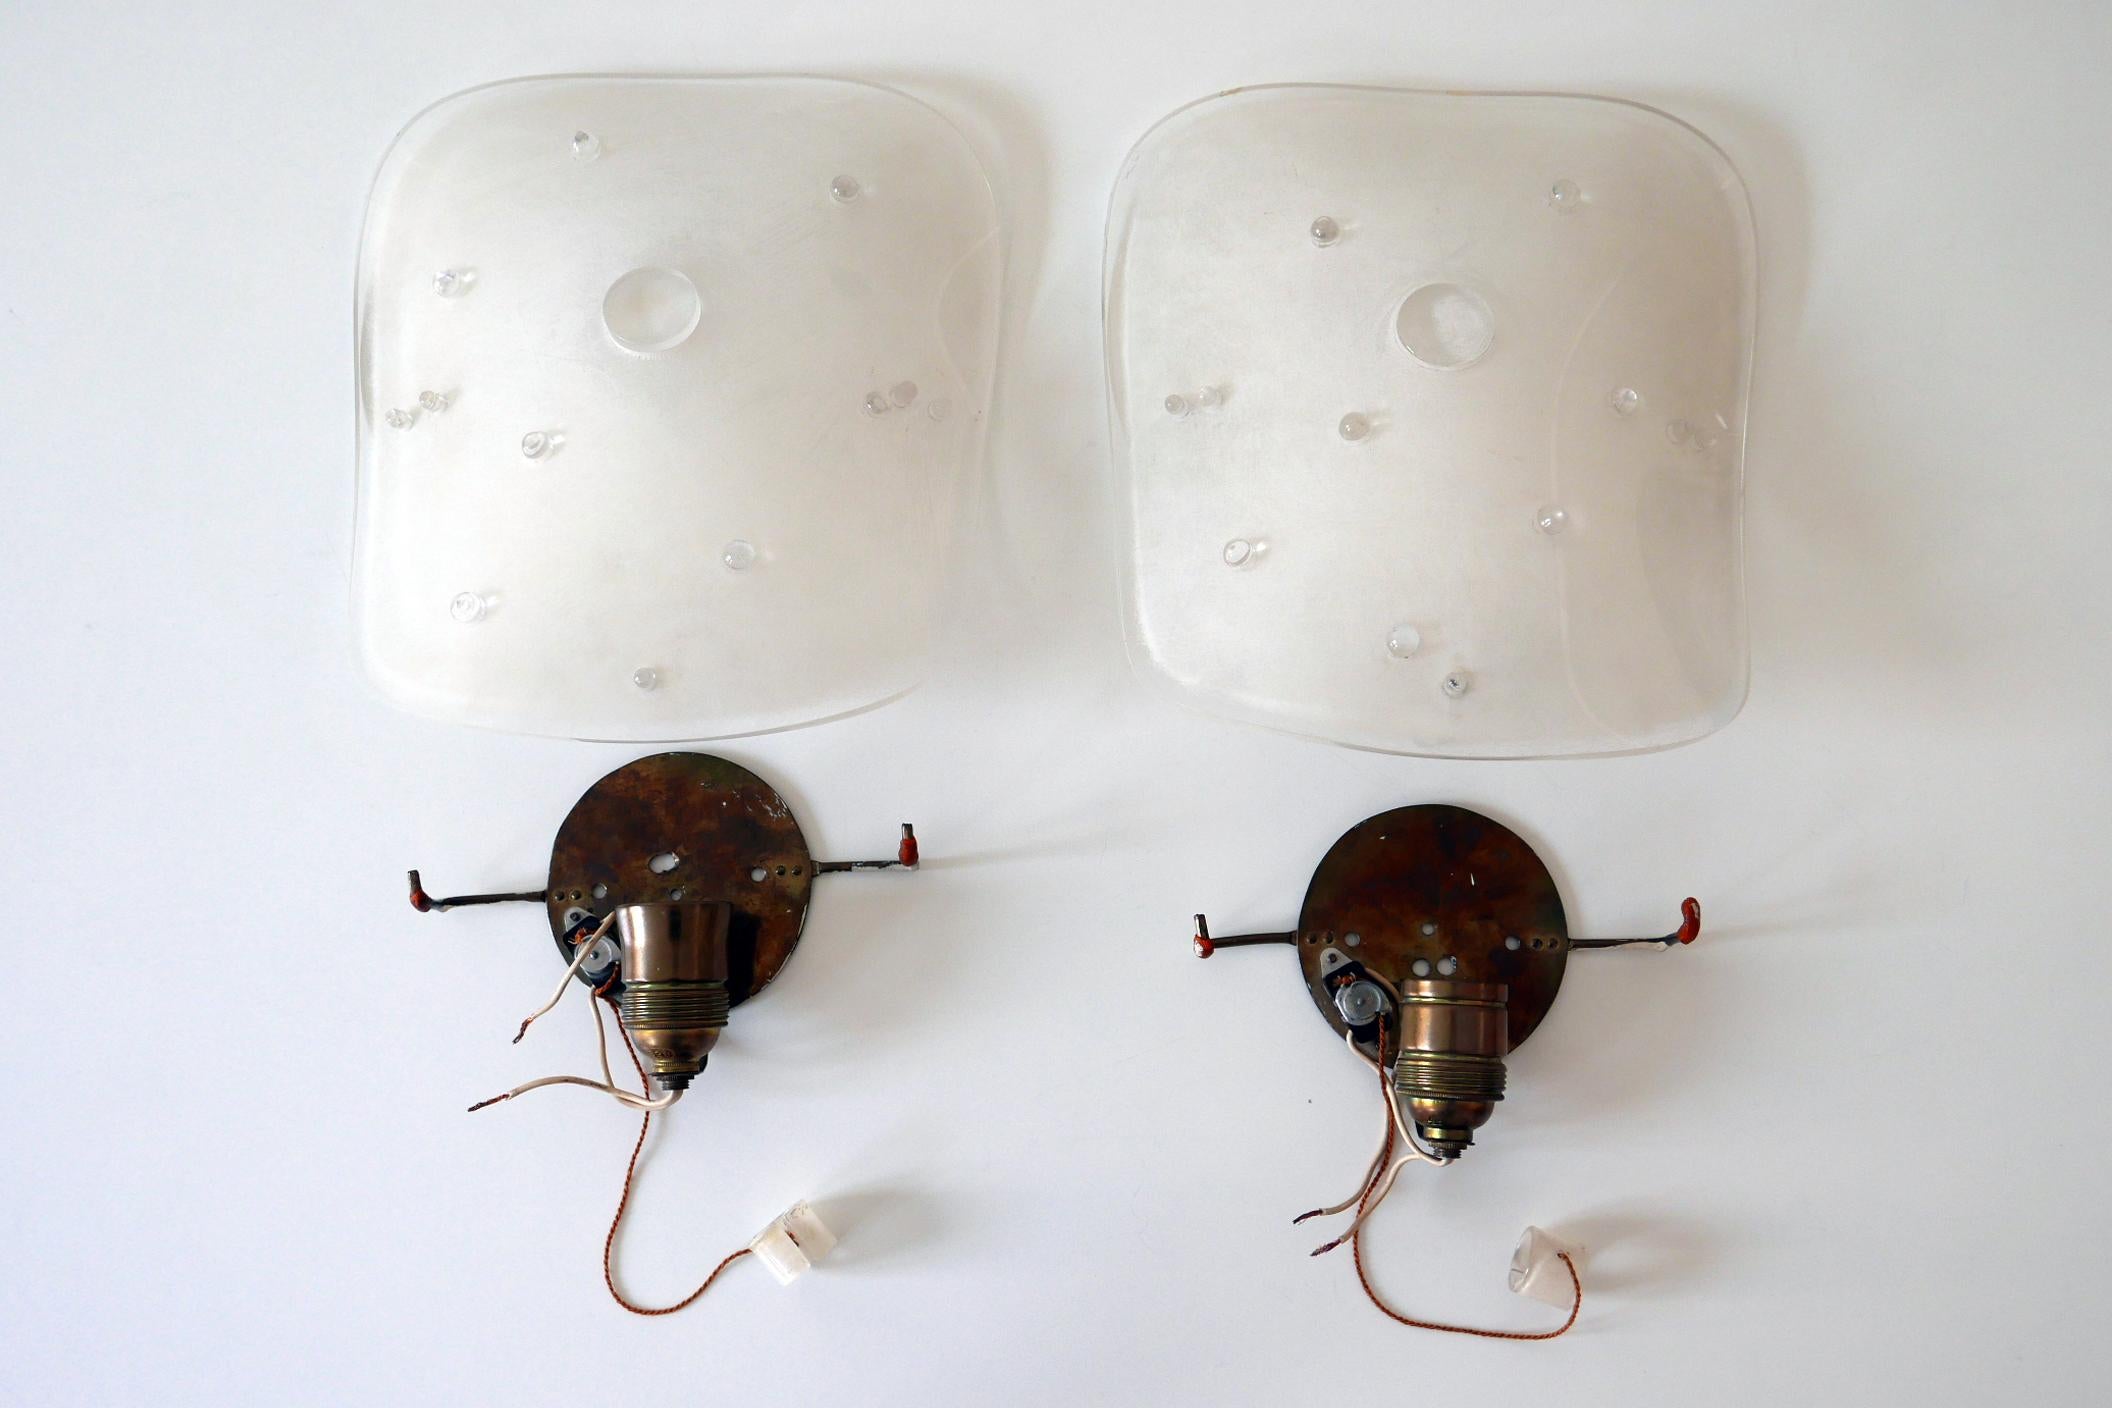 Set of Two Mid-Century Modern Lucite Wall Lamps Sconces by Rupert Nikoll, 1960s For Sale 6